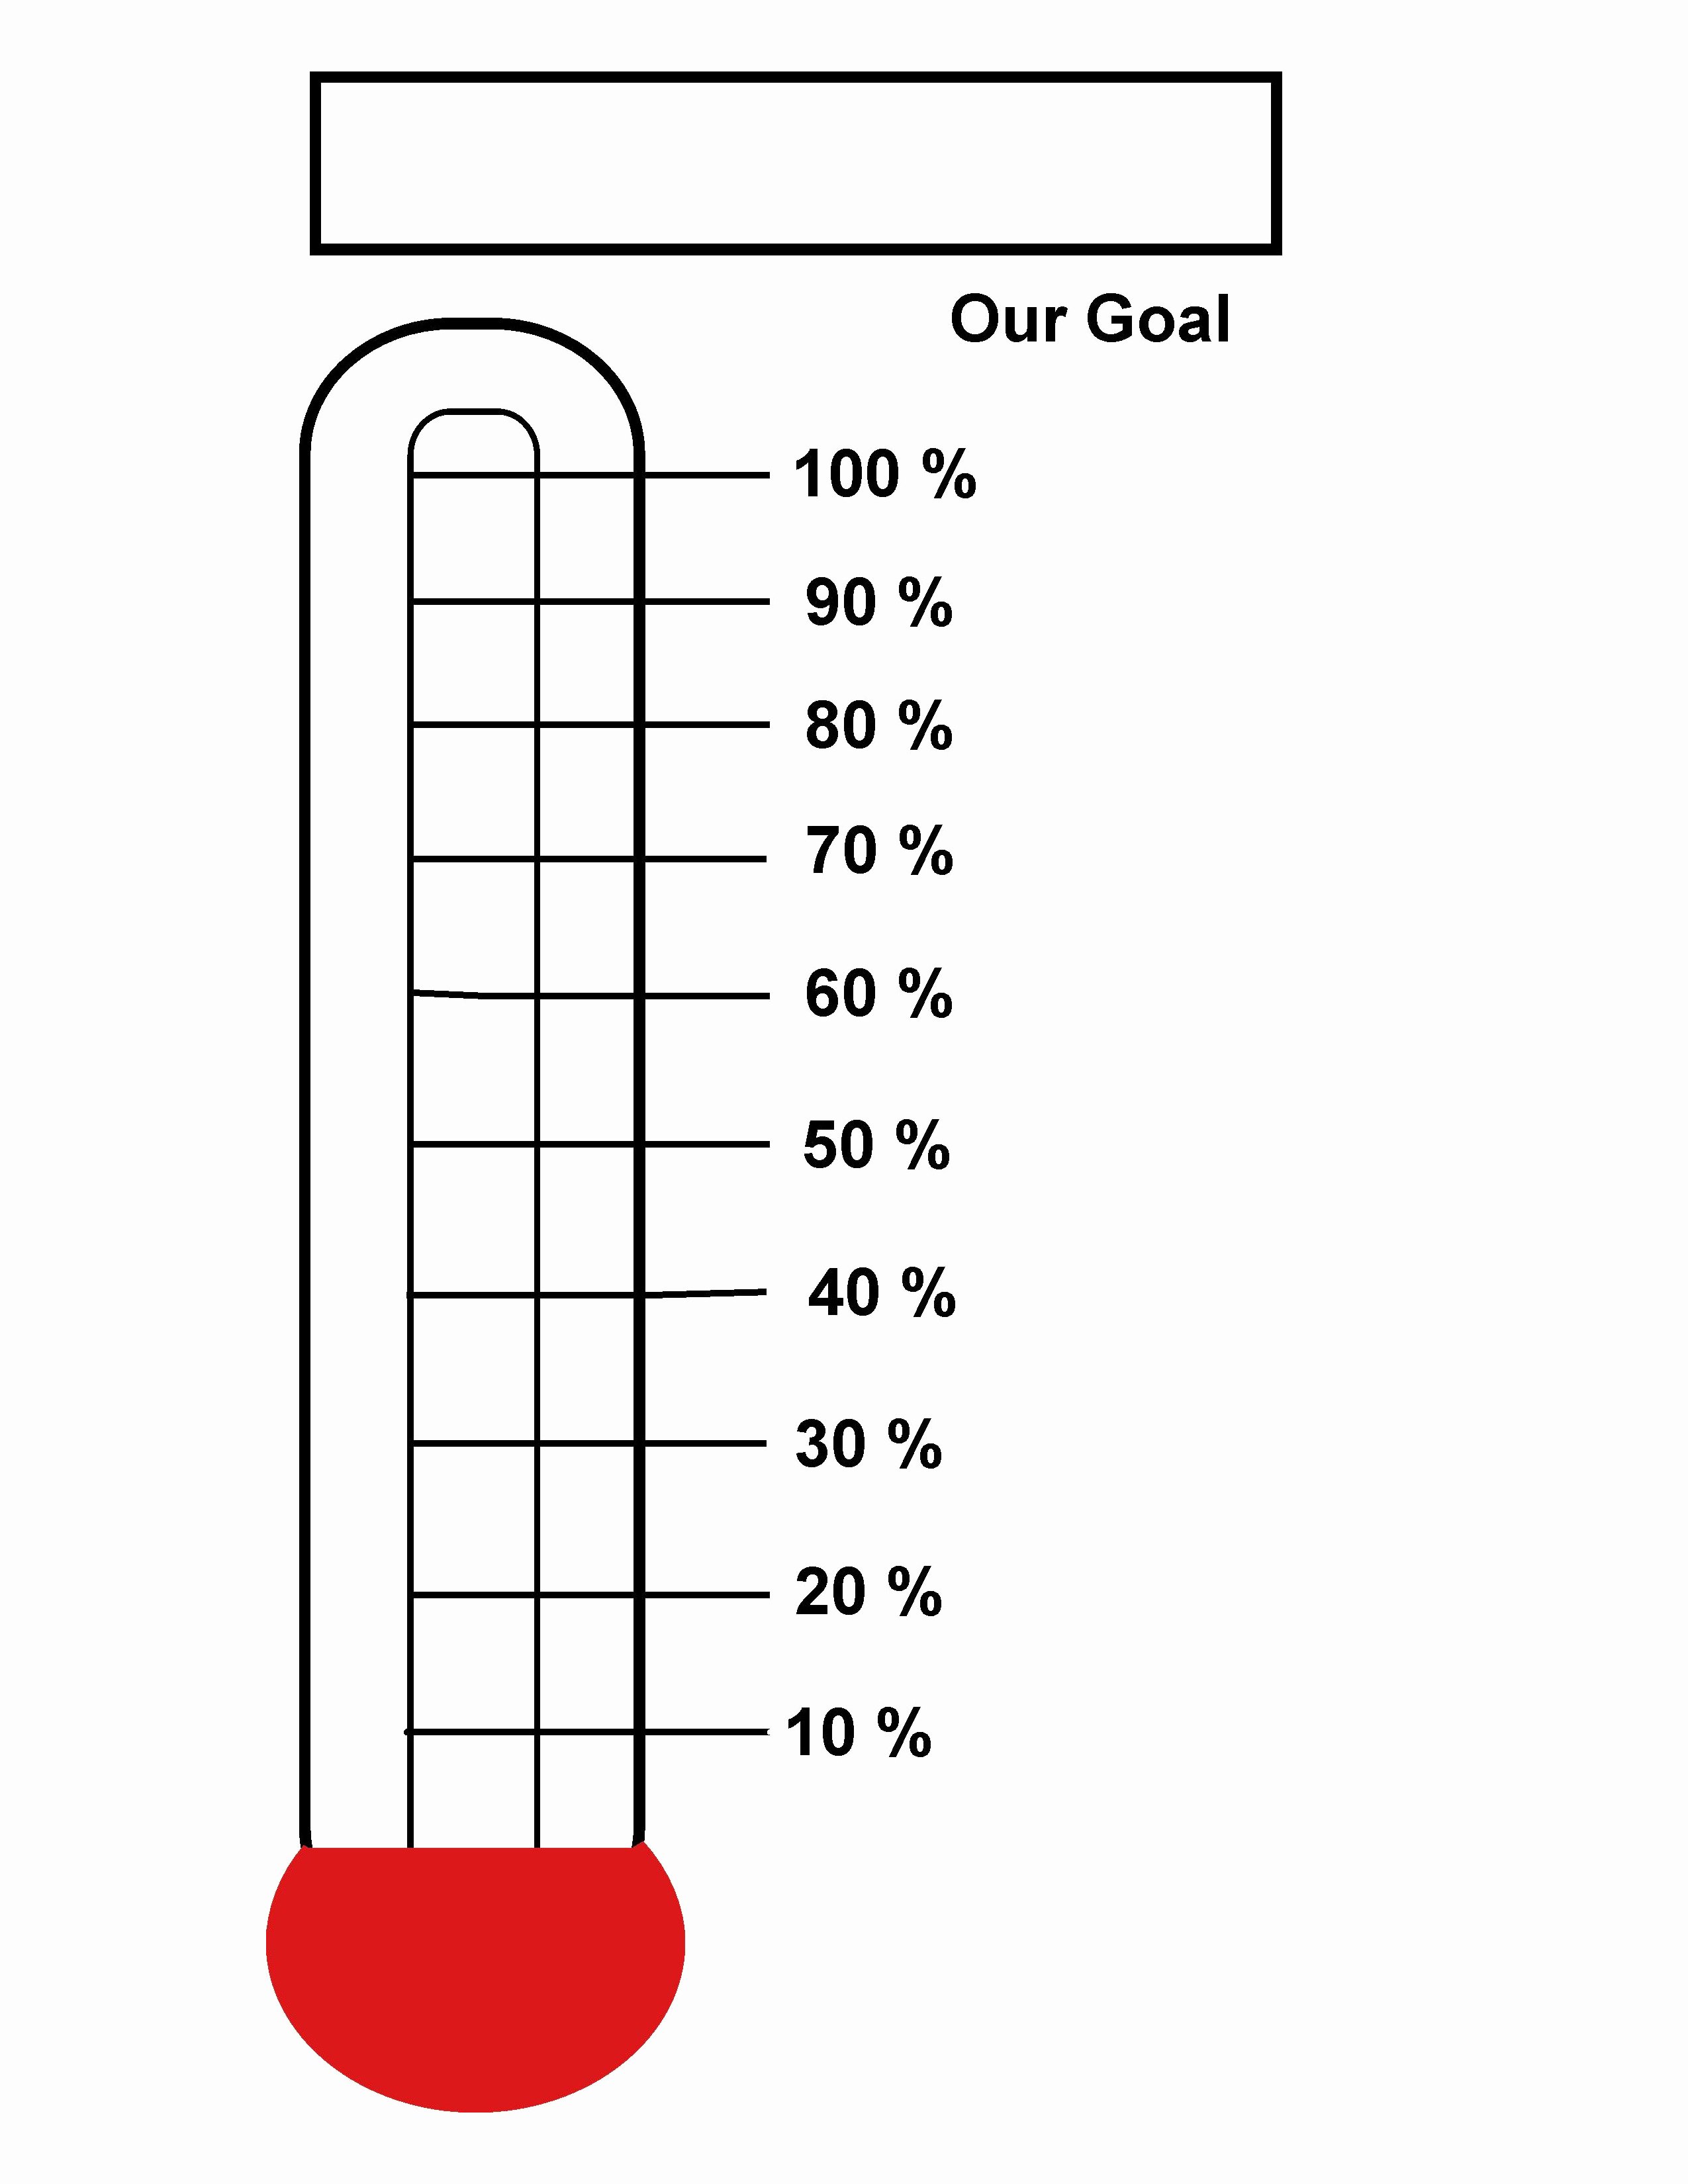 Printable thermometer Goal Lovely Goal thermometer Template Printable